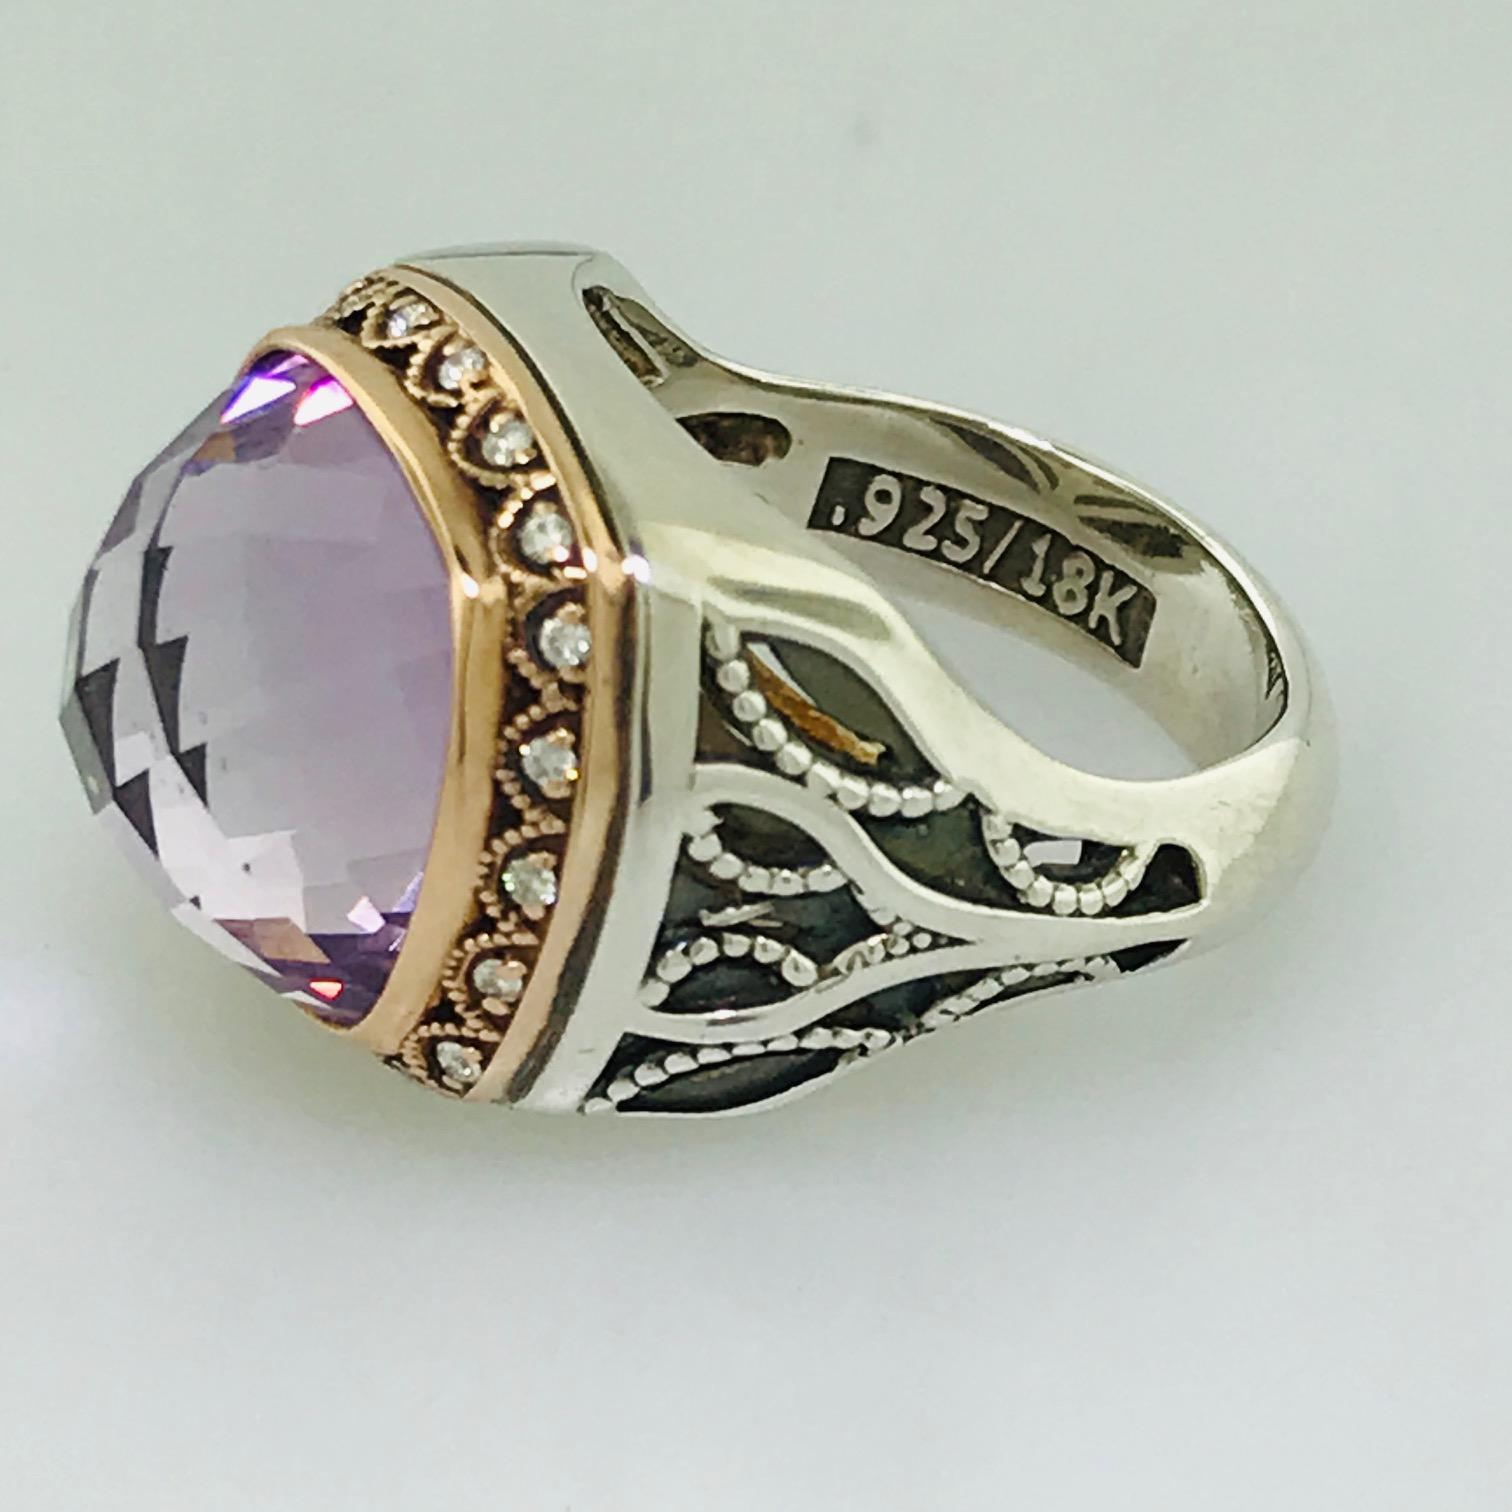 This Tacori Original has over 18 carat gemstone and has such a unique story. Set in 18 karat Rose Gold and sterling silver this ring has a bold combination that is very fitting and complimenting to the center stone. 
The center stone in this Tacori